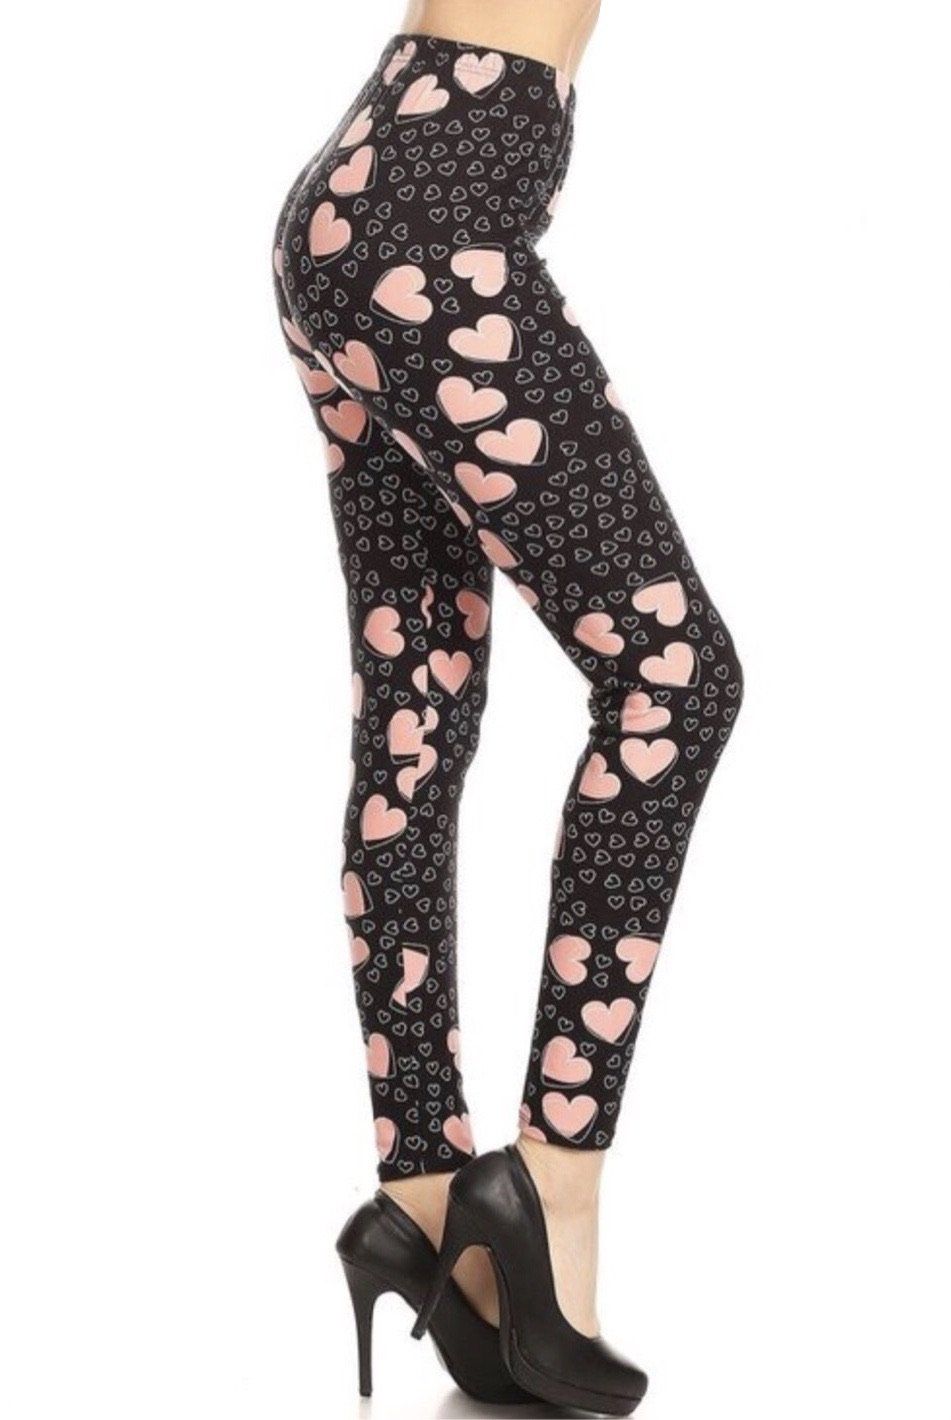 Womens Valentine's Day Pink Heart Leggings: XPlus 2xl/3xl Leggings MomMe and More 